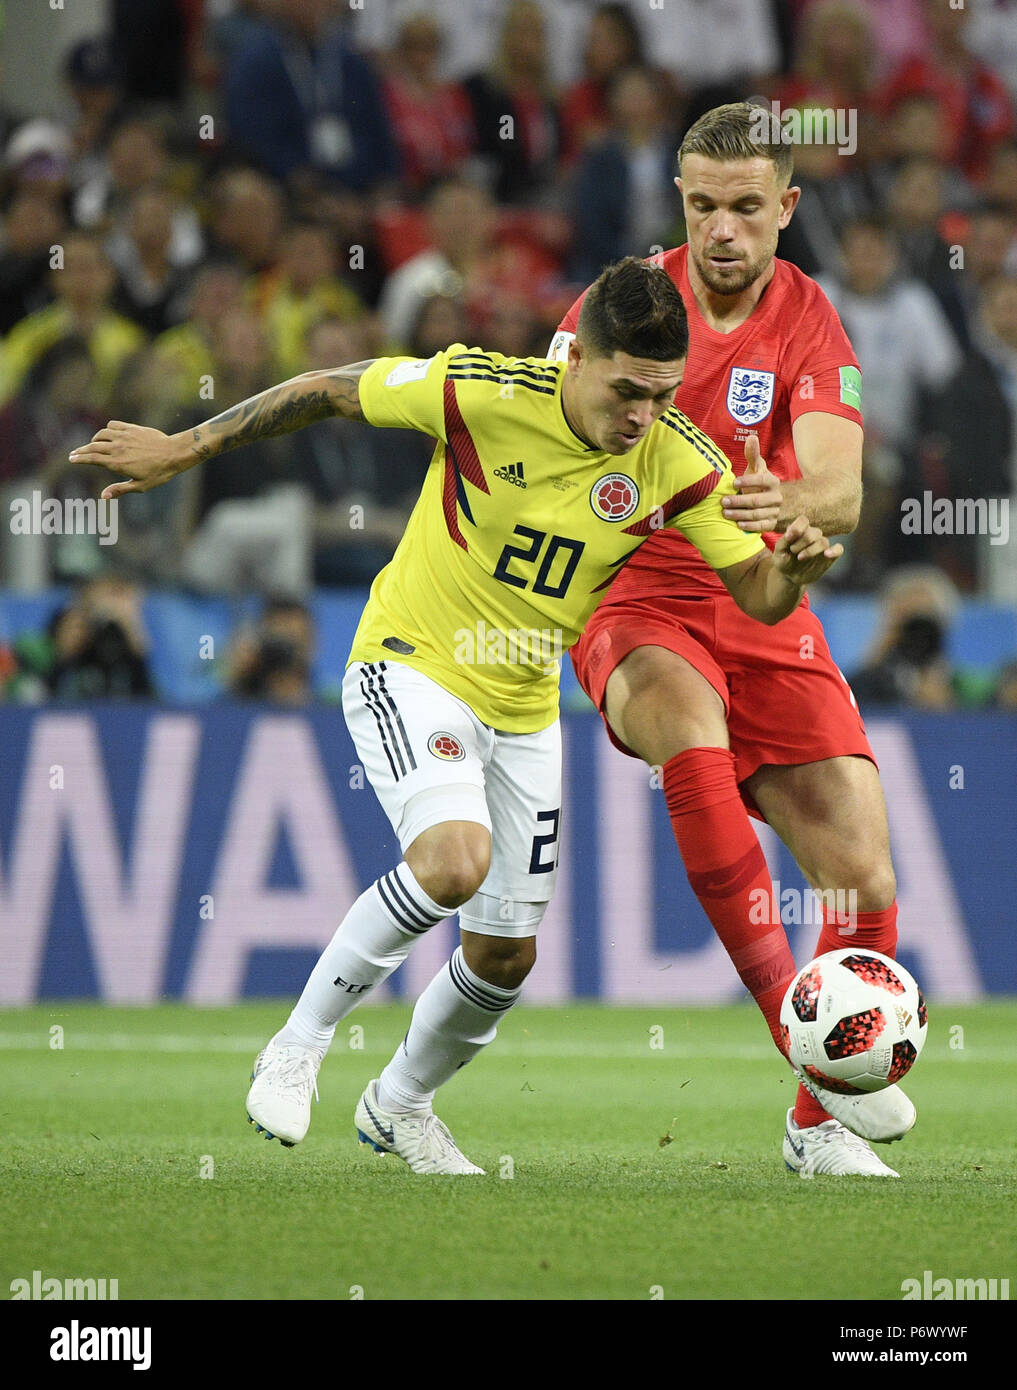 Moscow, Russia. 3rd July, 2018. Jordan Henderson (R) of England vies with Juan Quintero of Colombia during the 2018 FIFA World Cup round of 16 match between England and Colombia in Moscow, Russia, July 3, 2018. Credit: Lui Siu Wai/Xinhua/Alamy Live News Stock Photo